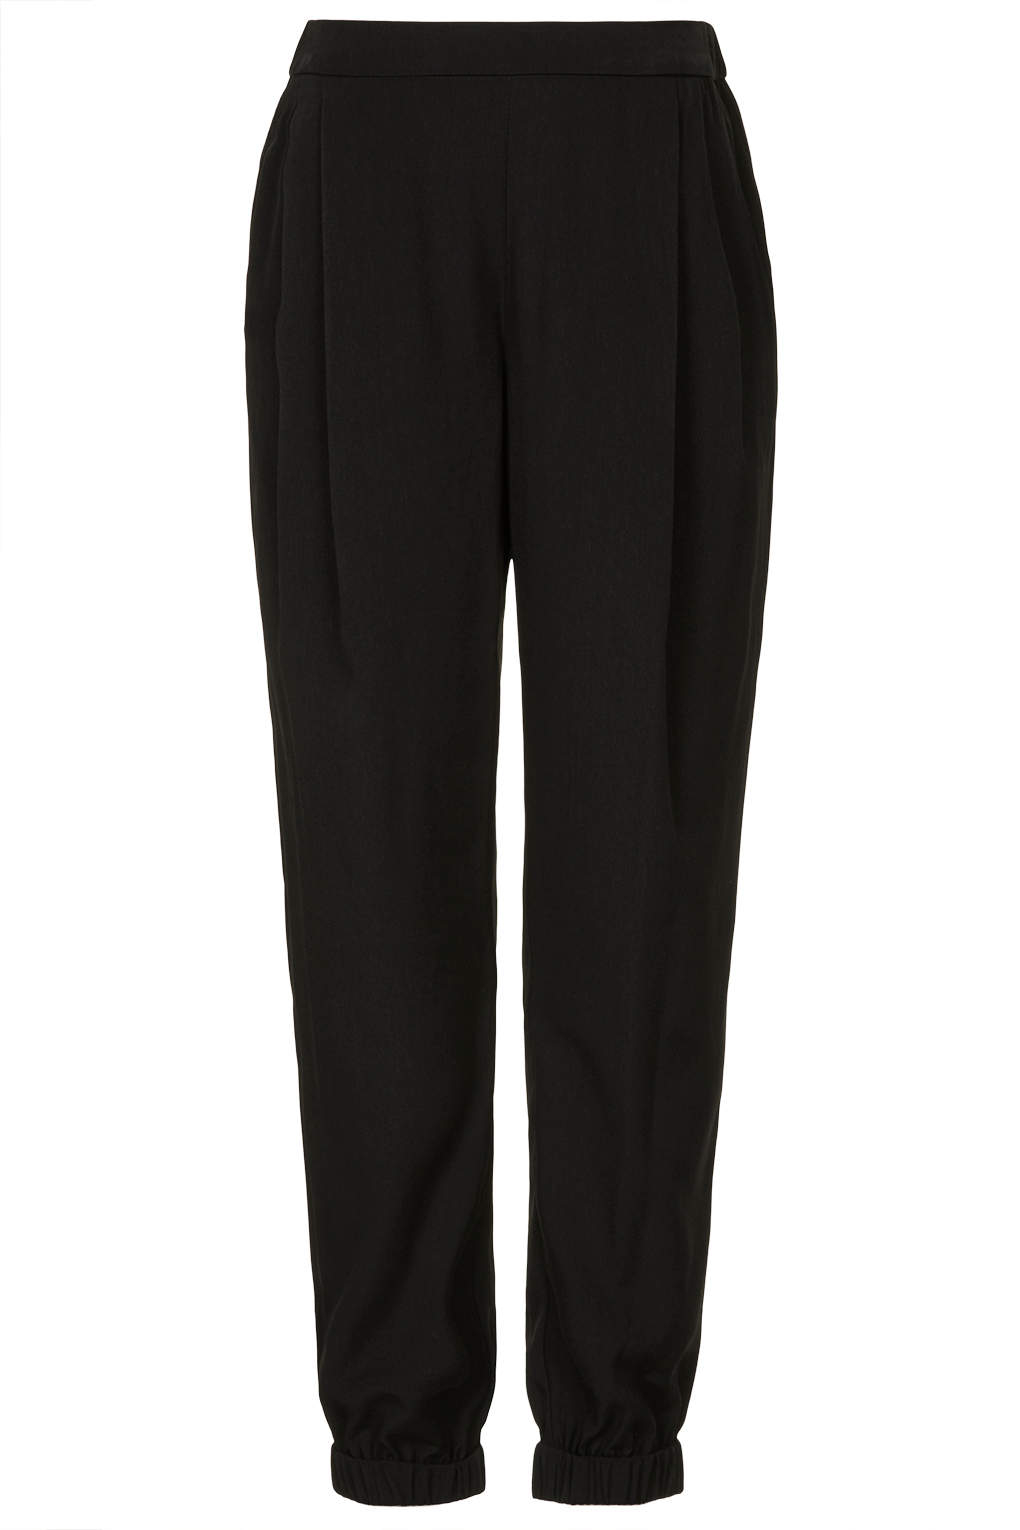 Lyst - Topshop Womens Maternity Luxe Cuff Joggers Black in Black